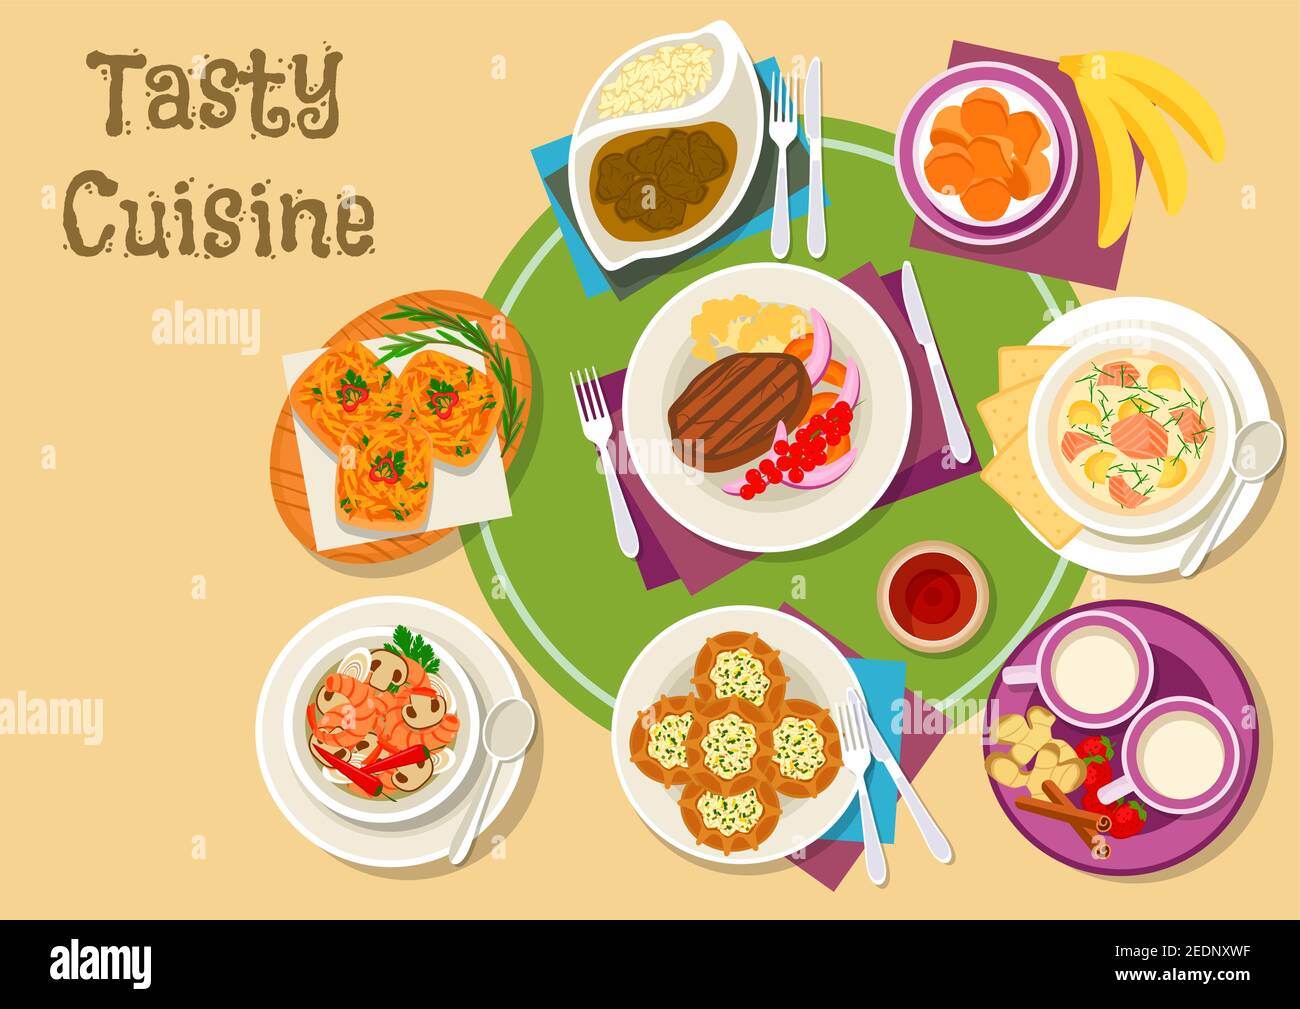 Thai and finnish cuisine dishes icon with green curry, fried banana, shrimp mushroom soup and pork sandwich, rice pie, salmon cream soup, venison in b Stock Vector